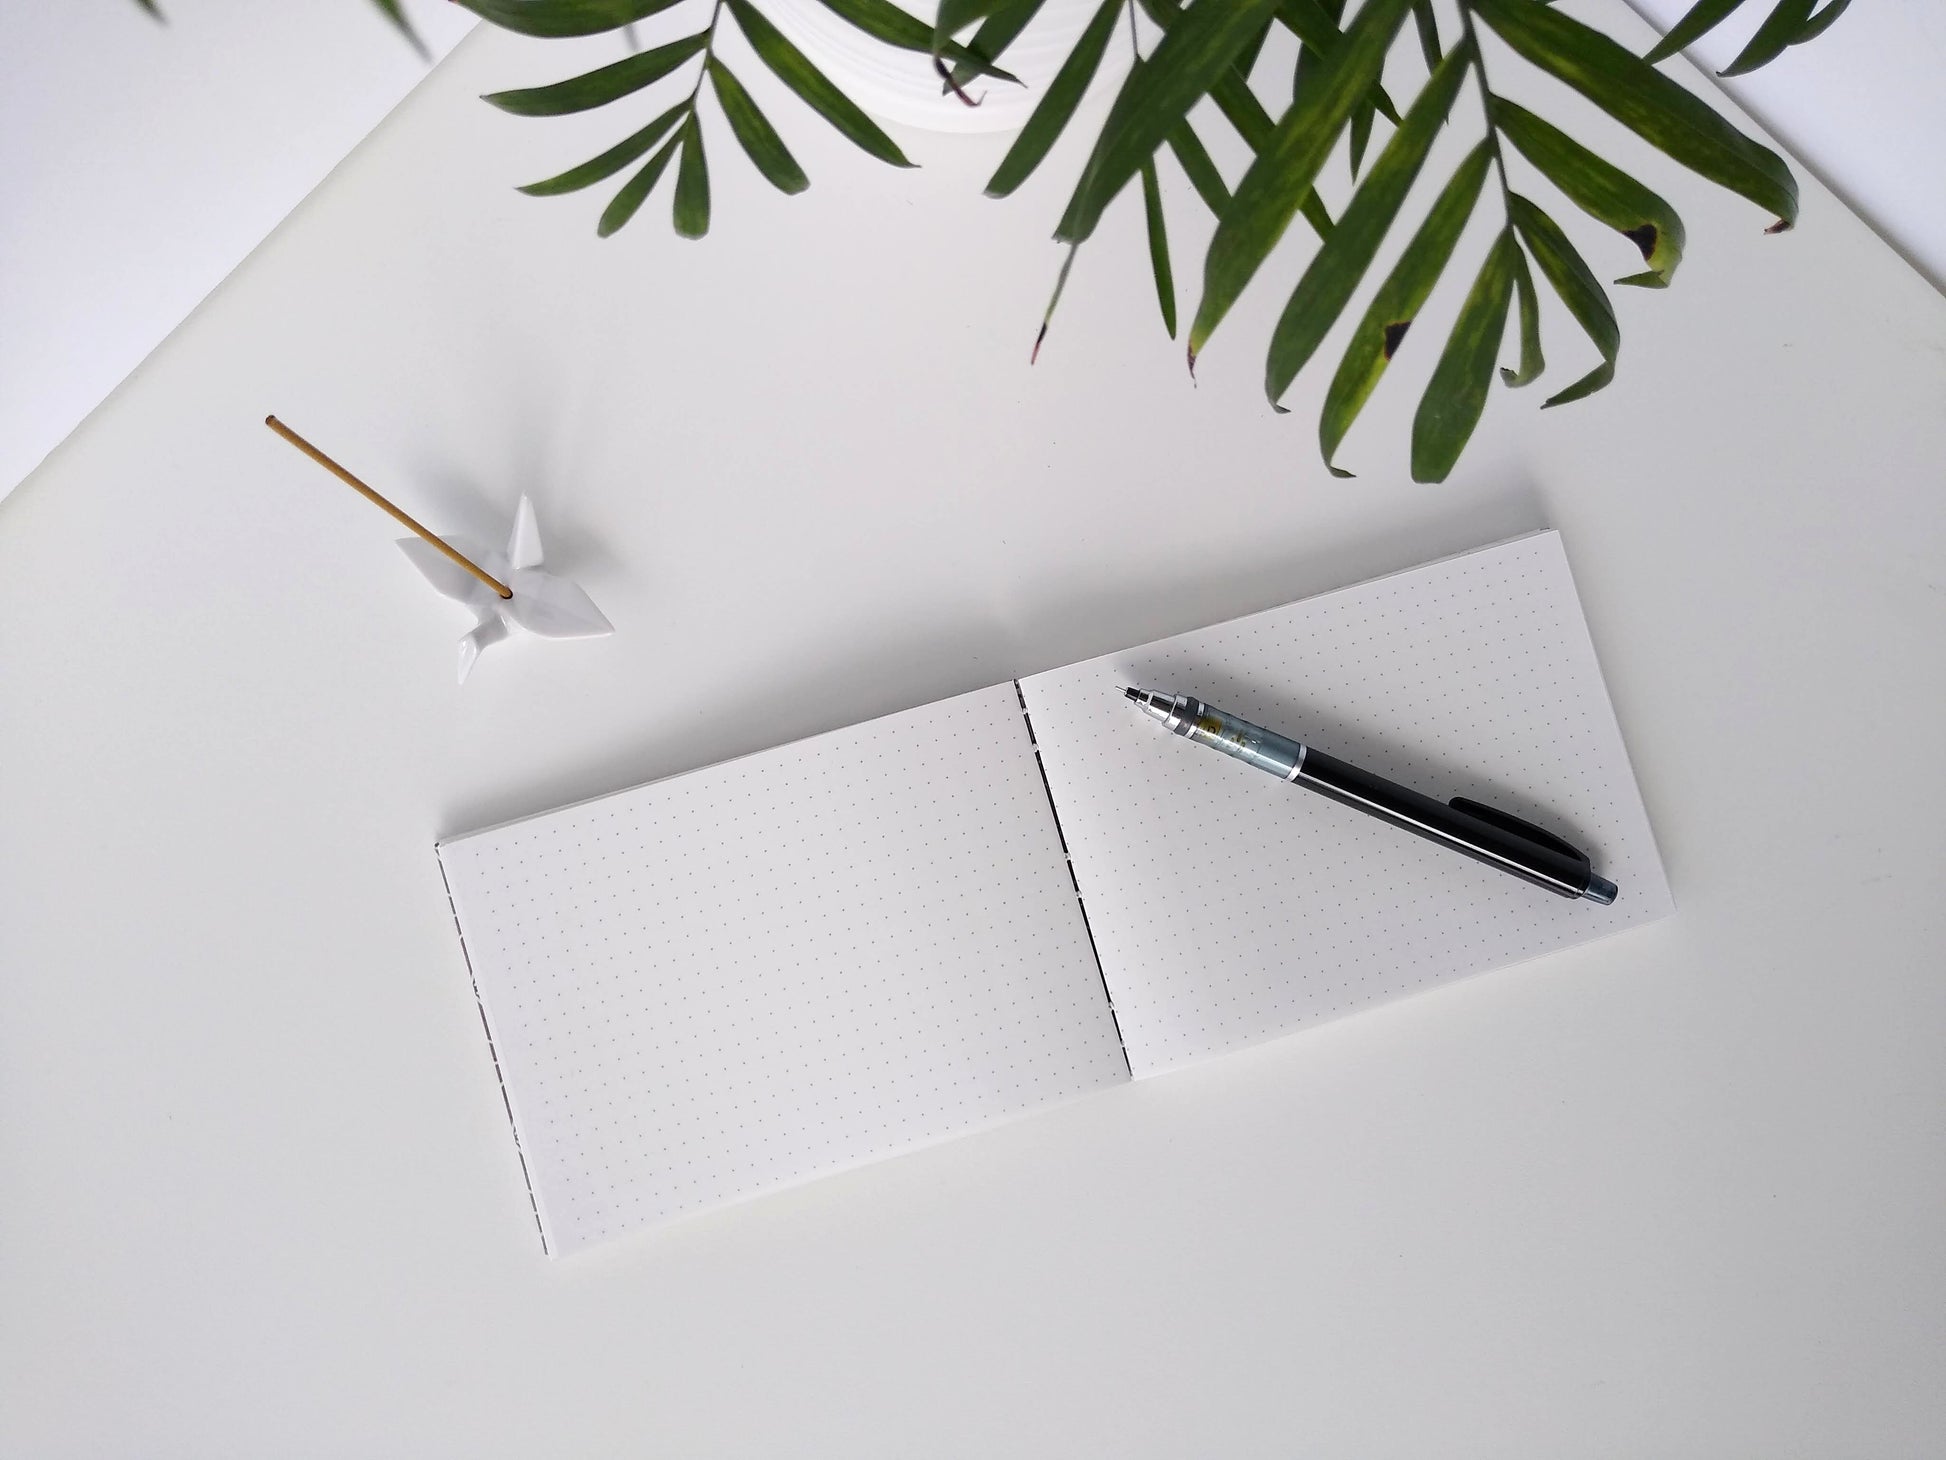 An open journal lays on a white background next to a potted plant and a ceramic crane. The journal has a grey thread connecting the pages at the spine and a black mechanical pencil rests across the white pages with a printed dot grid.